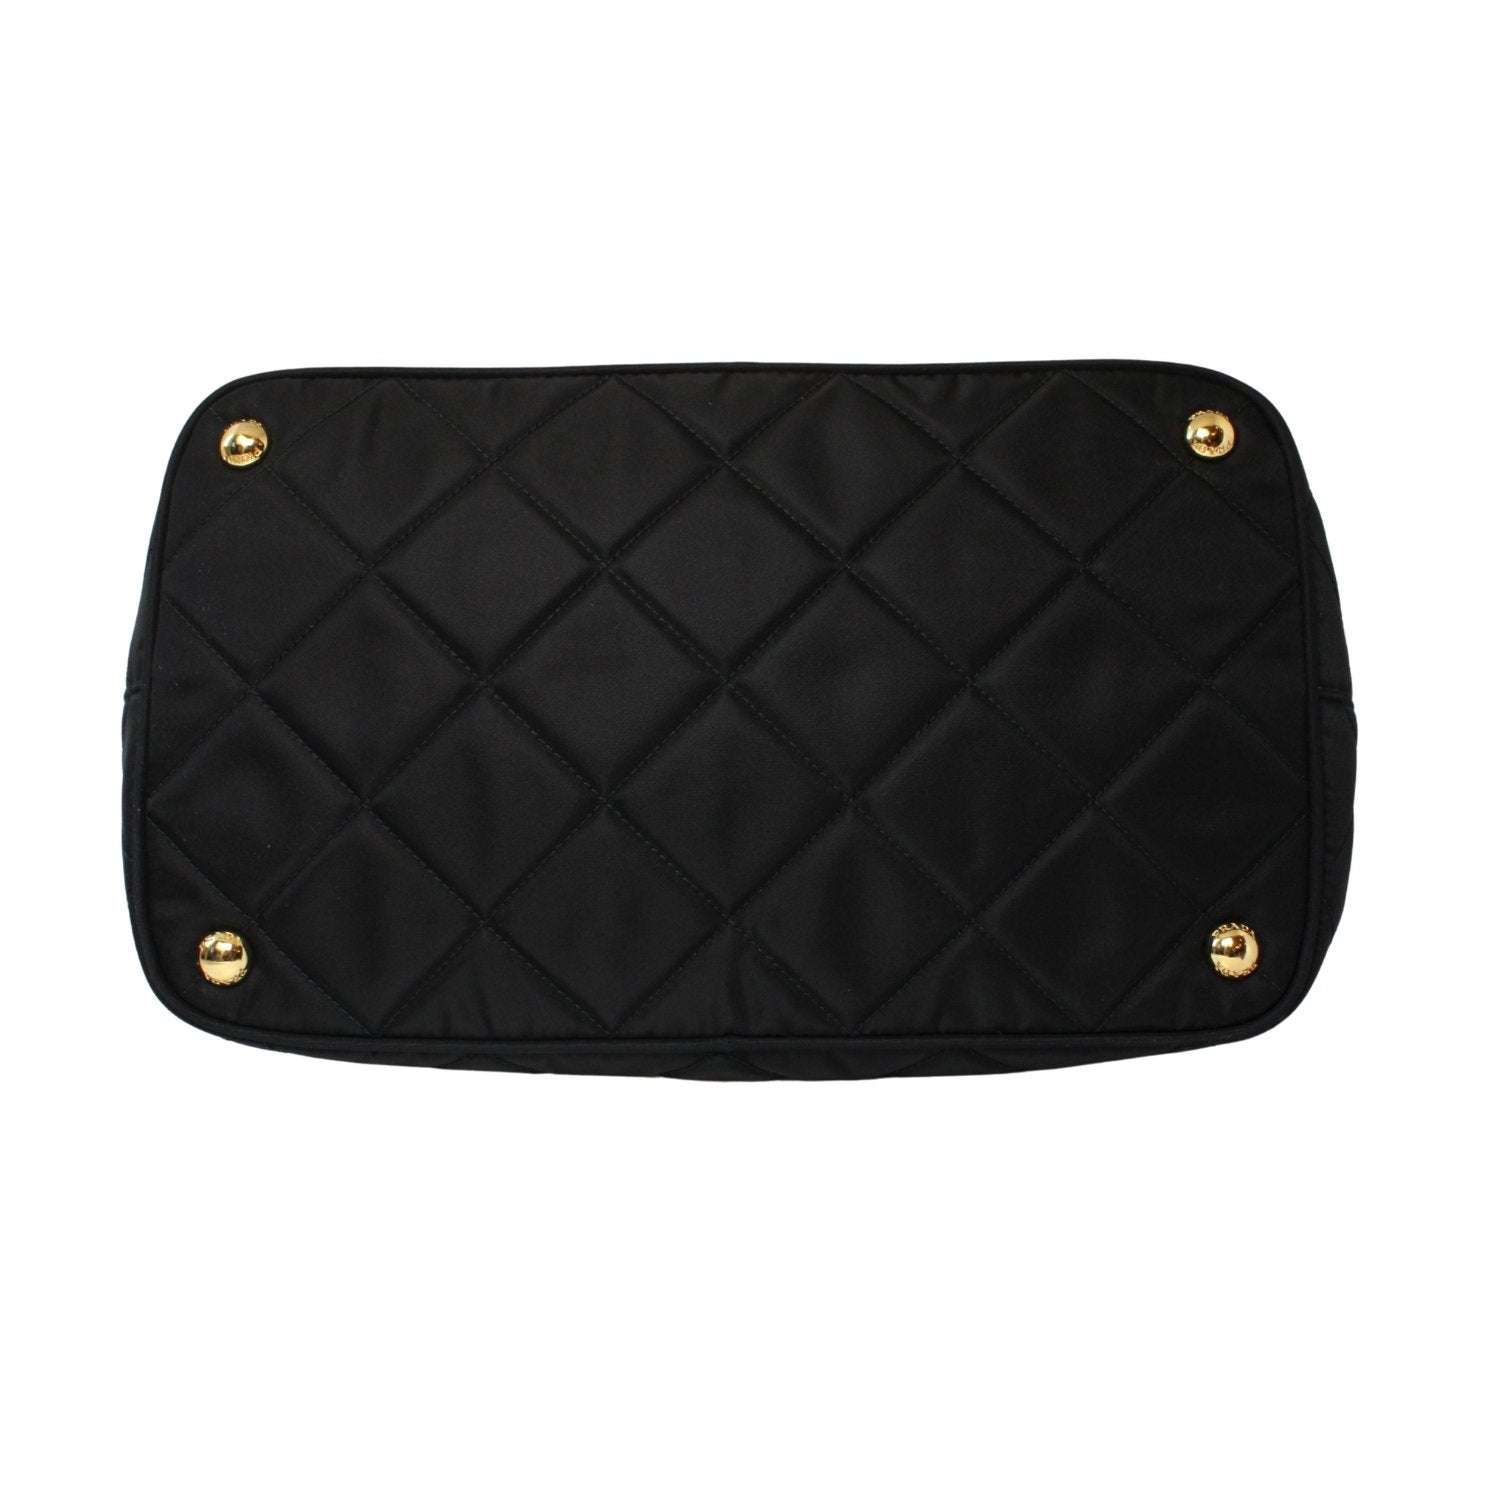 Prada Black Tessuto Nylon Gold Chain Quilted Shoulder Bag Tote 1BG740 at_Queen_Bee_of_Beverly_Hills